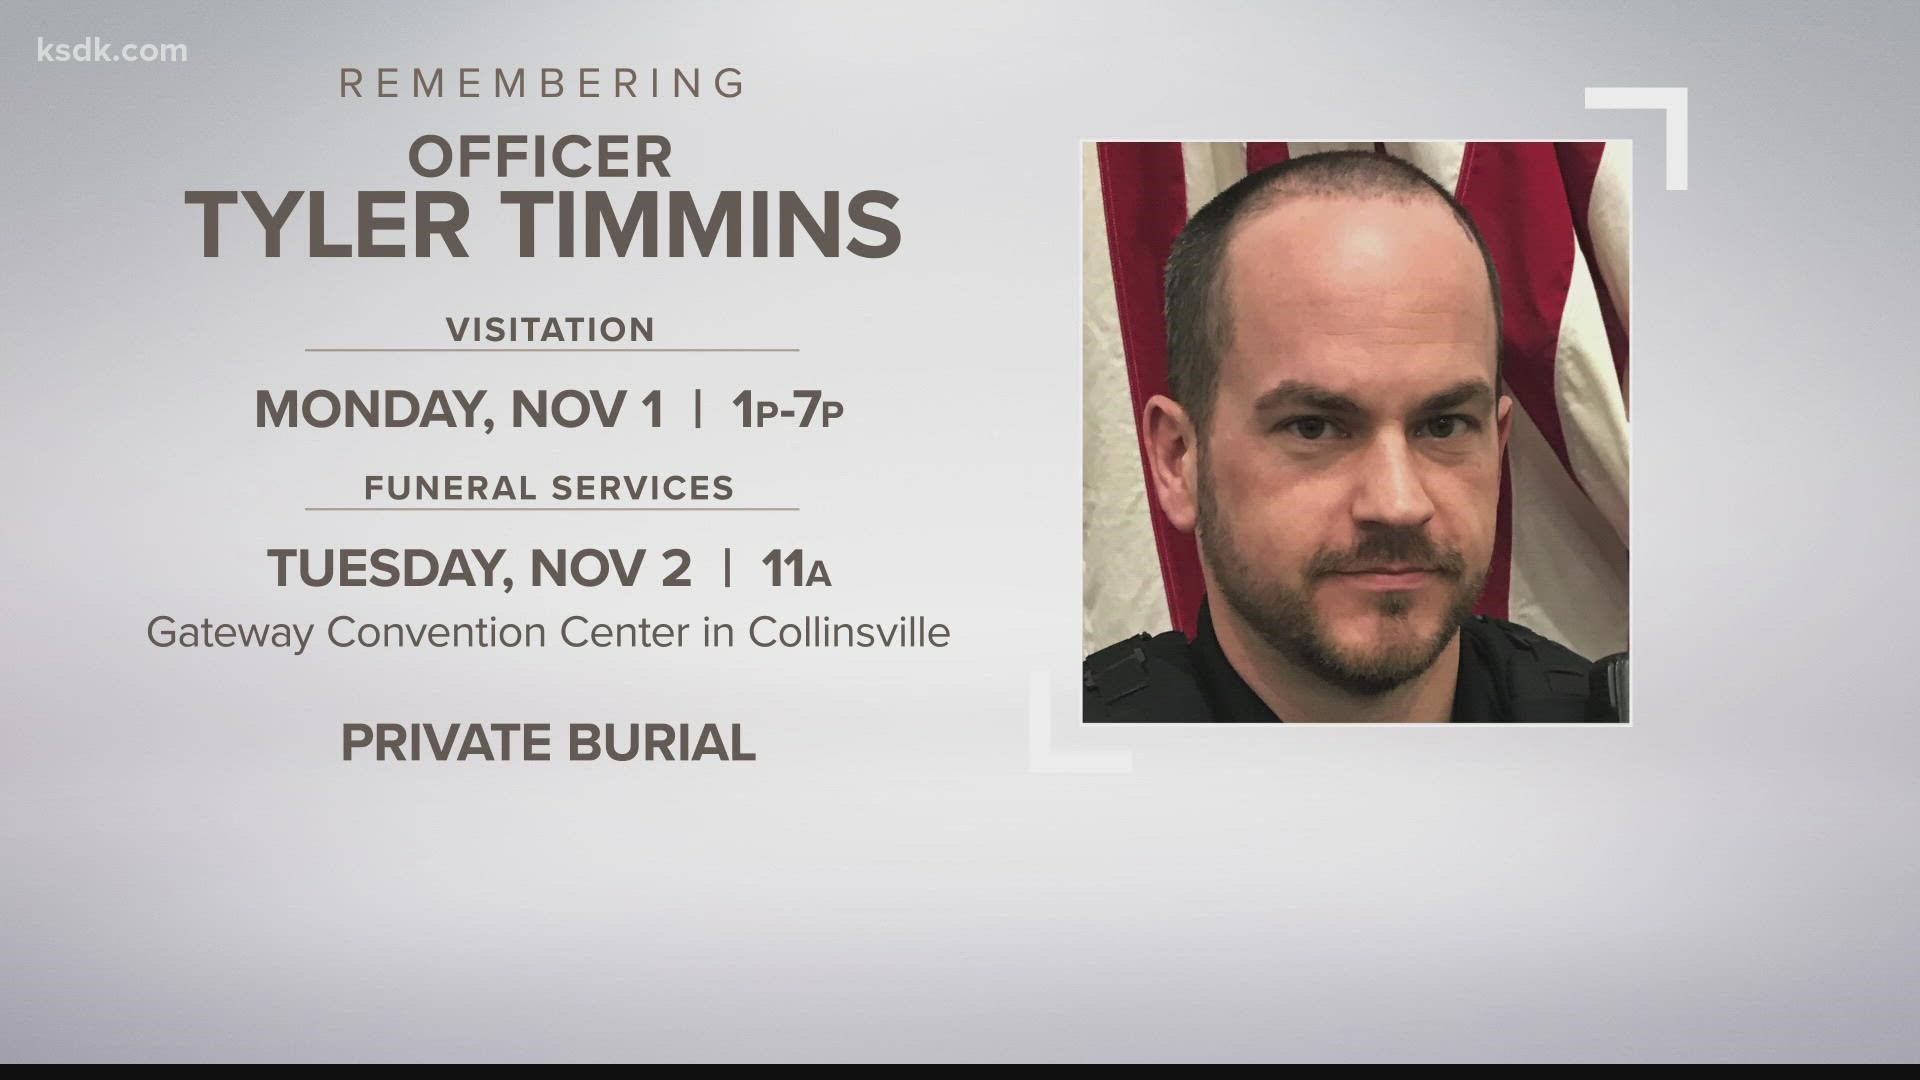 His visitation and funeral will both be held at the Gateway Convention Center in Collinsville.